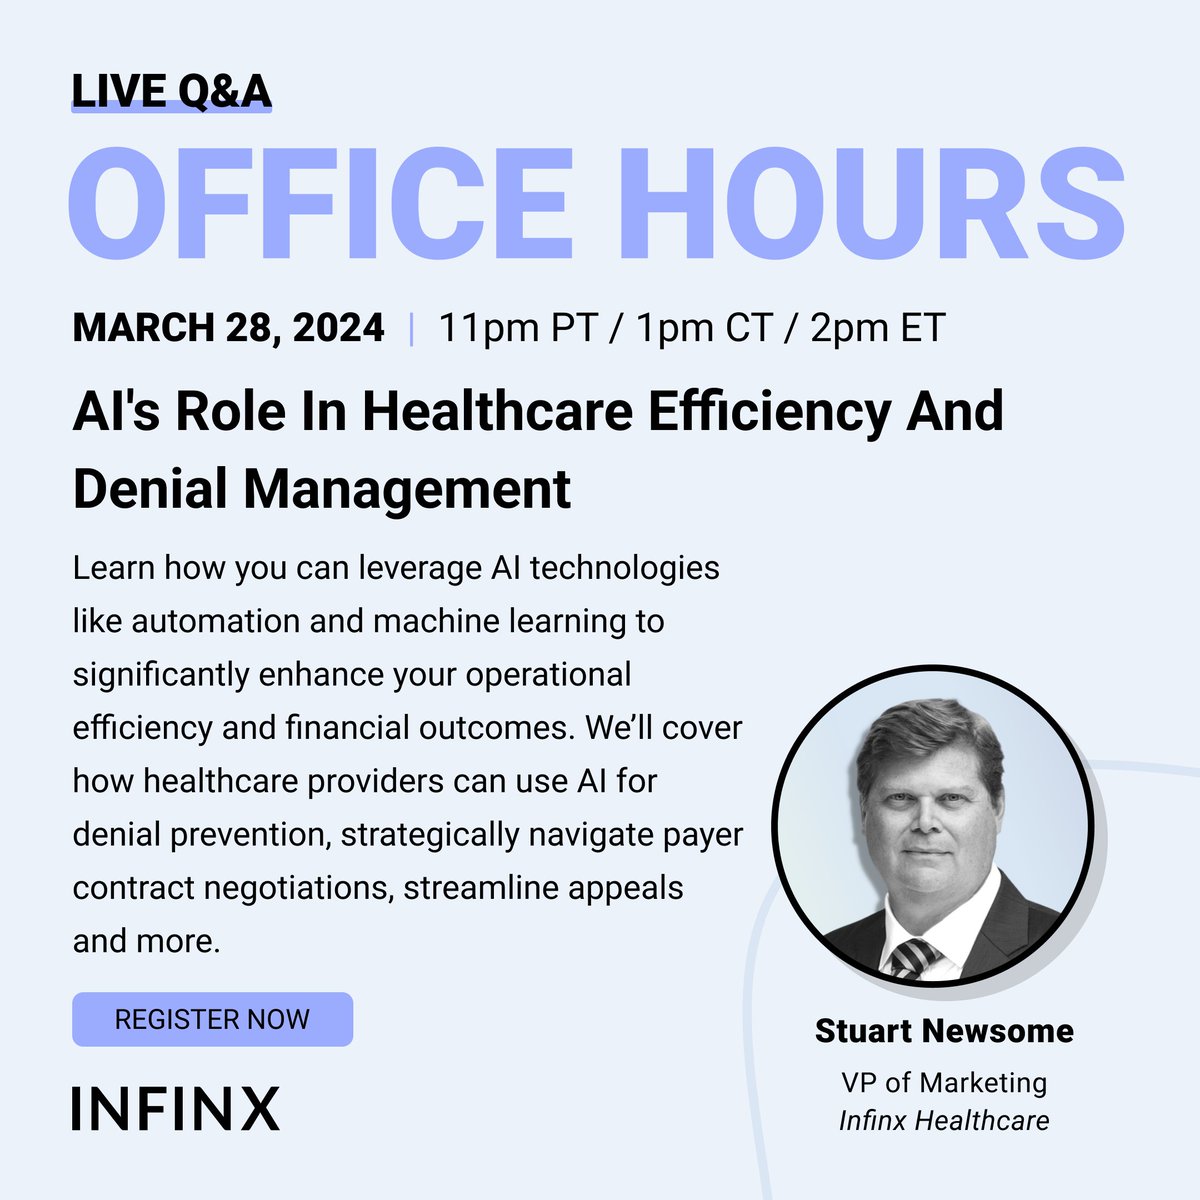 There’s still time to register for today's Office Hours on AI in healthcare efficiency and denials! Stuart Newsome will cover: ✅ AI for denials ✅ ROI practices for AI tools ✅ And payer contract strategy hubs.li/Q02r47bf0 #DenialsManagement #AI #RCMAutomation #ML